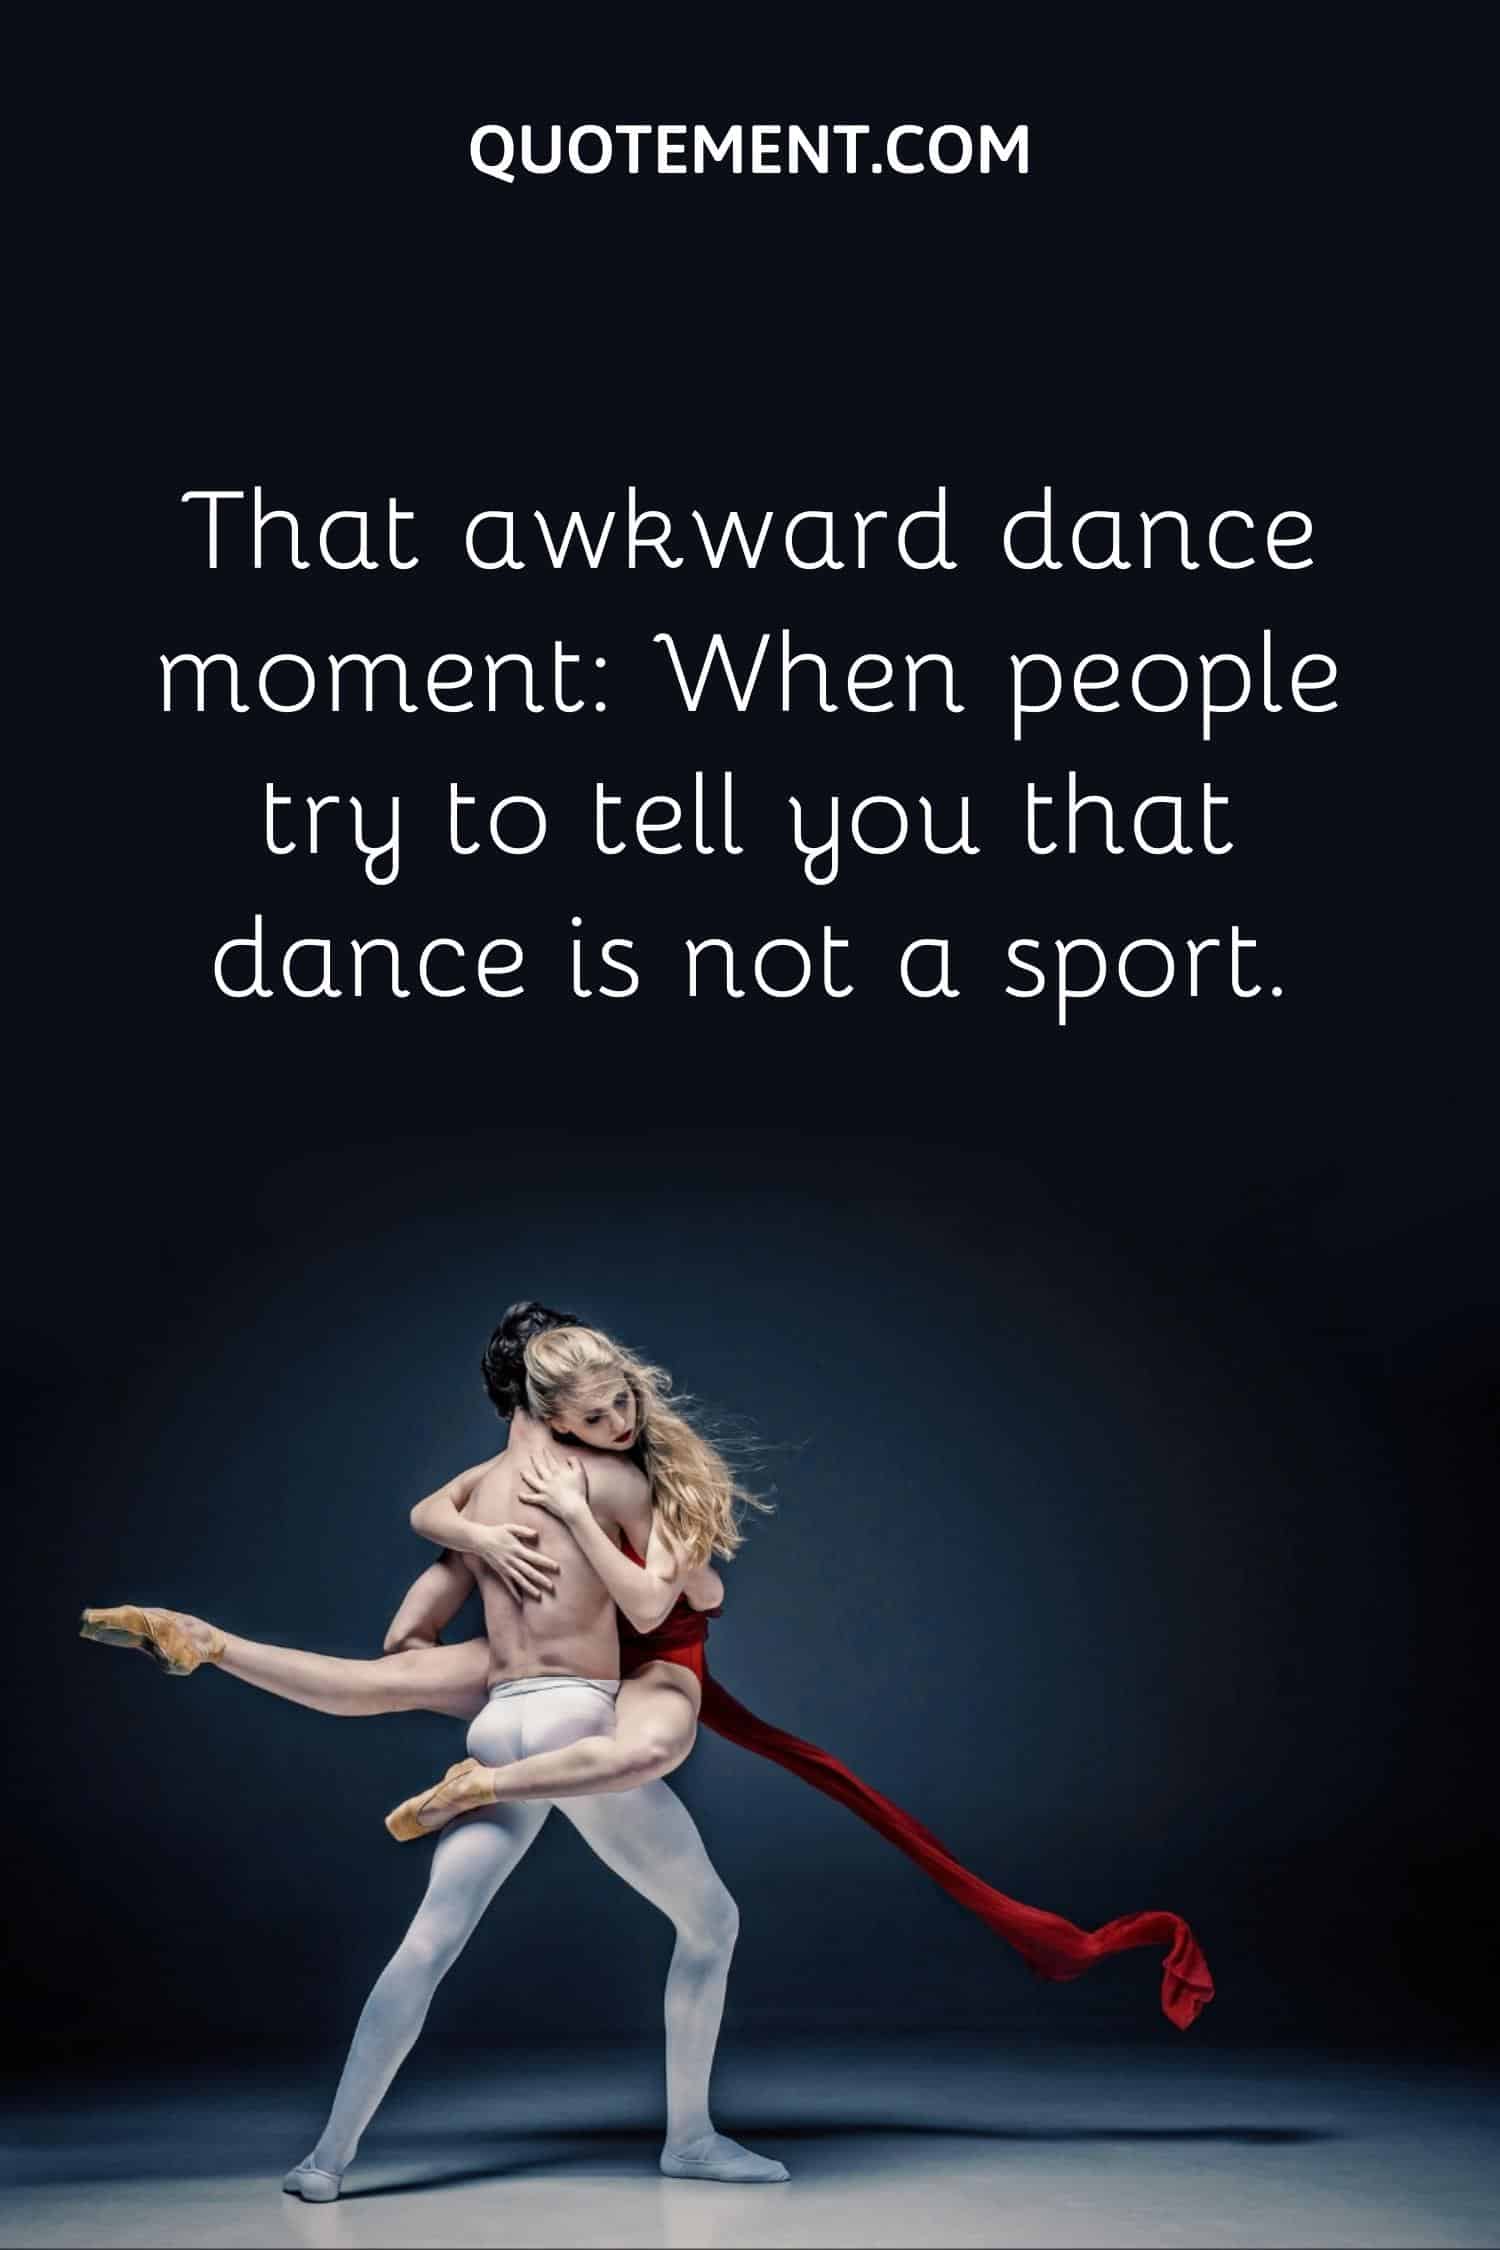 When people try to tell you that dance is not a sport